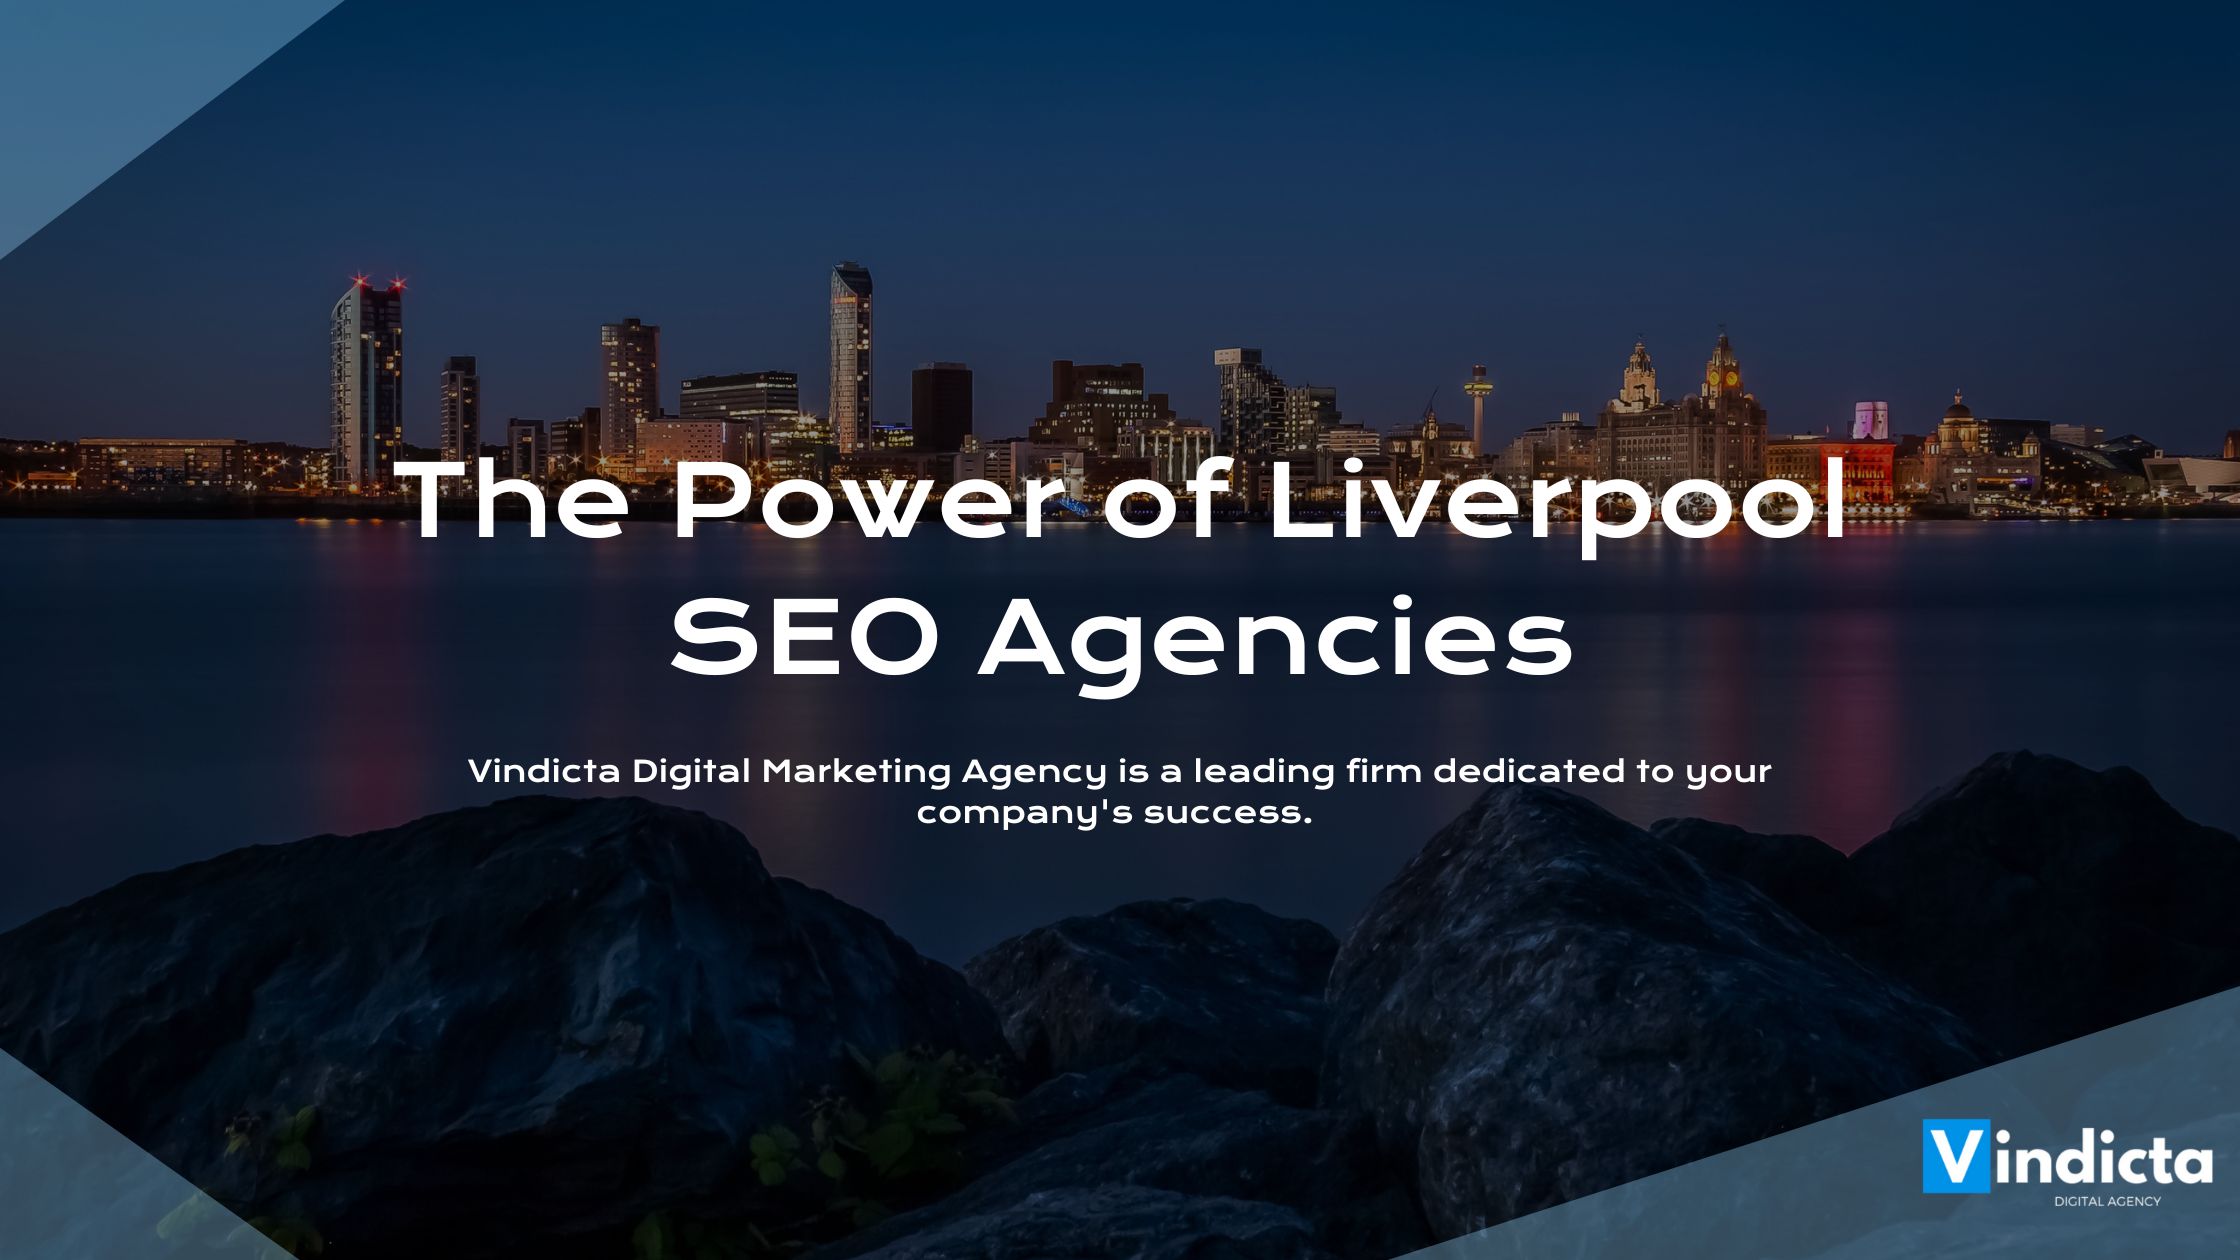 we're diving into the digital rabbit hole to unearth the magic of SEO and, more specifically, the added advantage of working with an SEO agency right here in our beloved Liverpool.